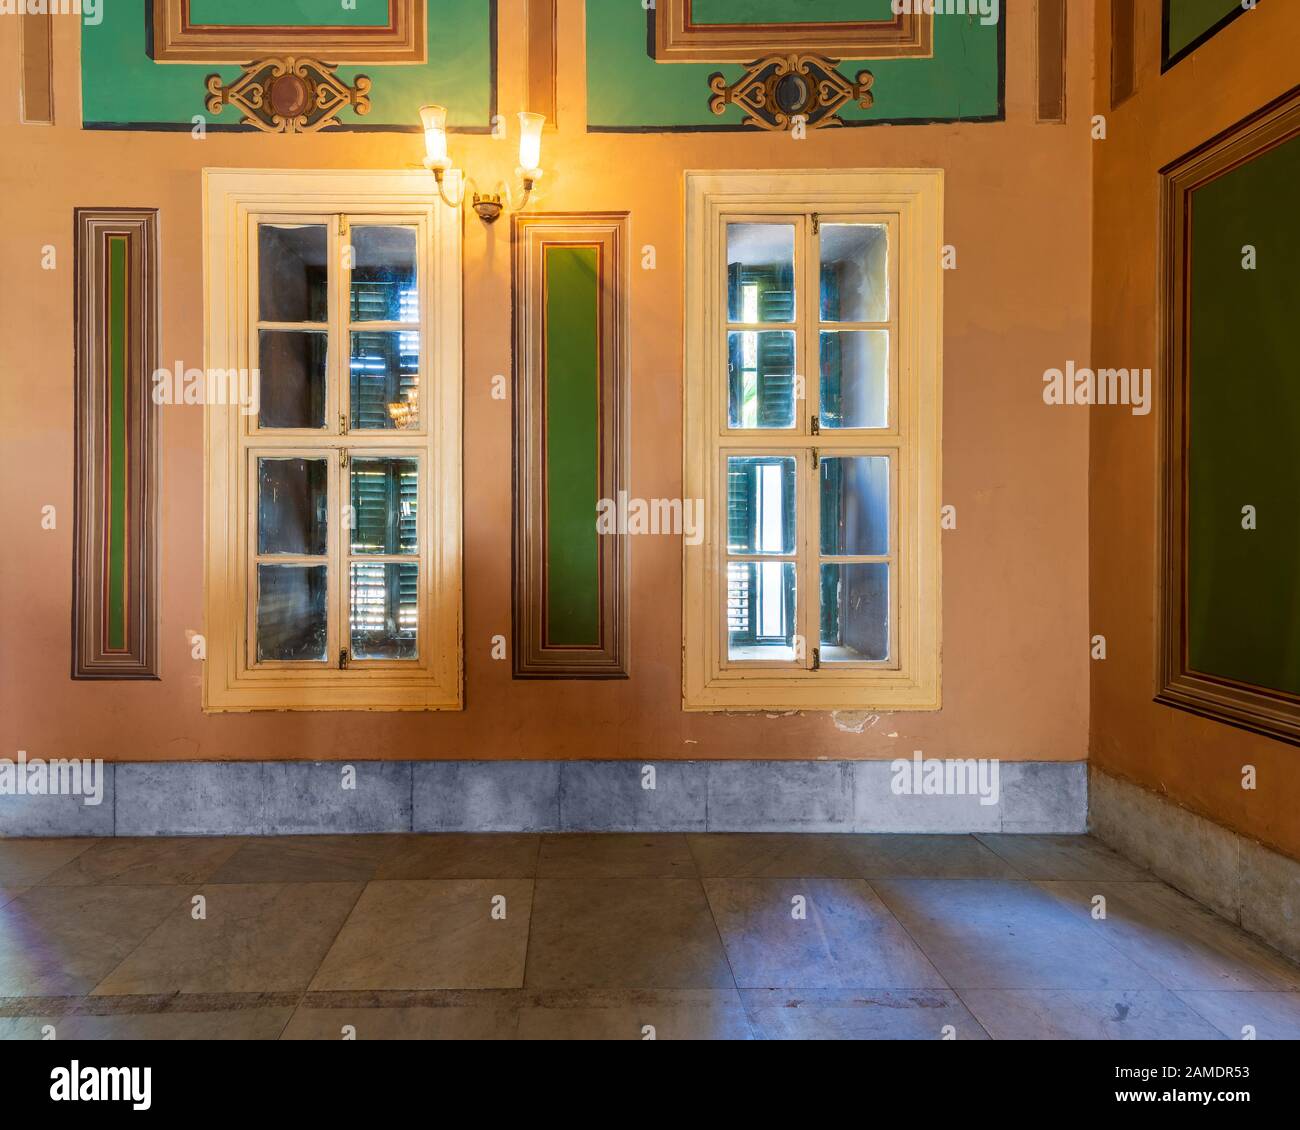 Corner orange wall with two narrow wooden window with closed green shutters, beautiful elegant rectangular green frames, and white tiled marble floor Stock Photo